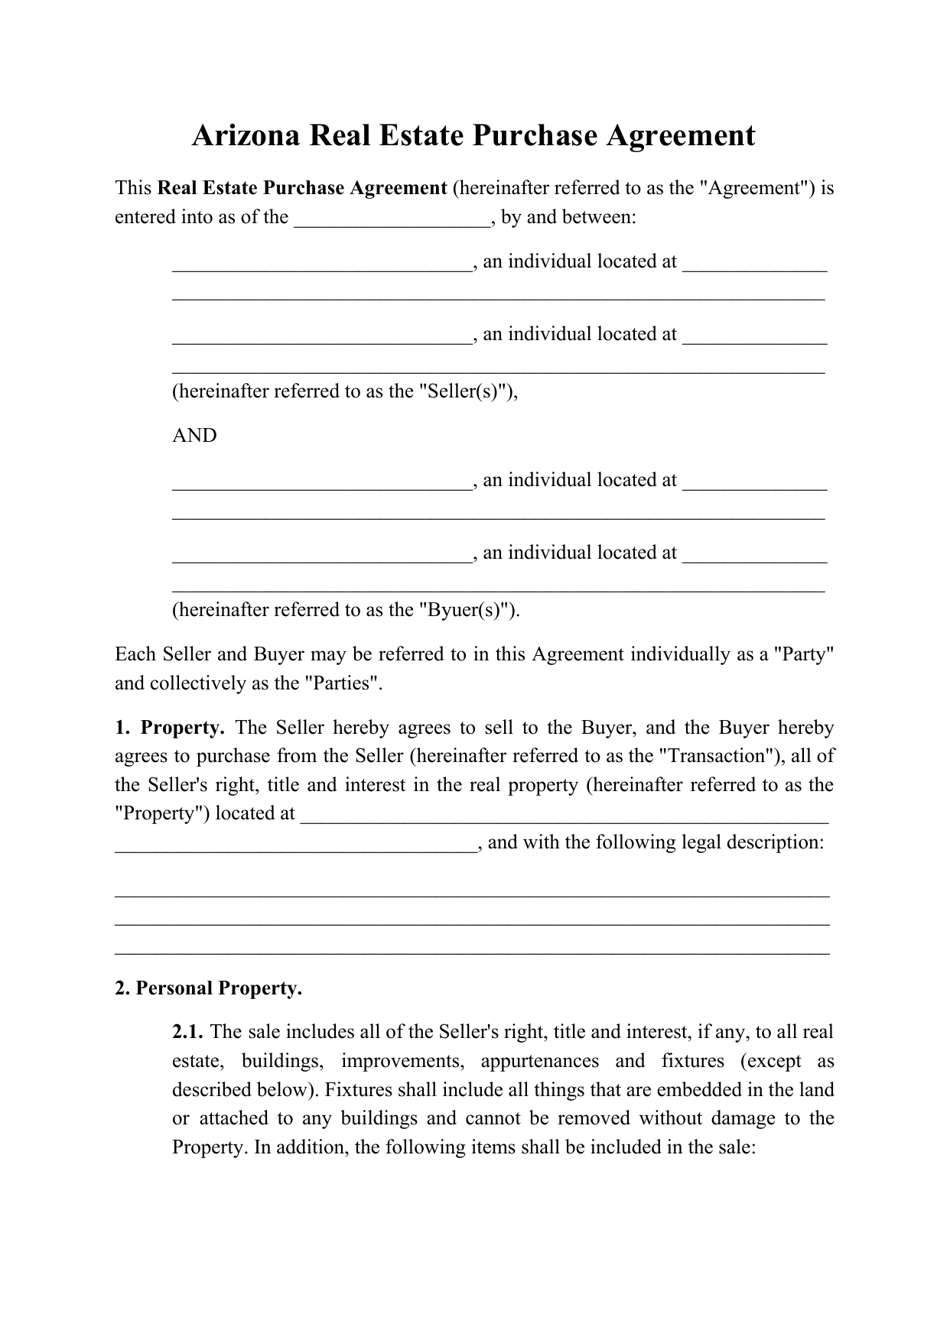 Real Estate Purchase Agreement Template - Arizona, Page 1